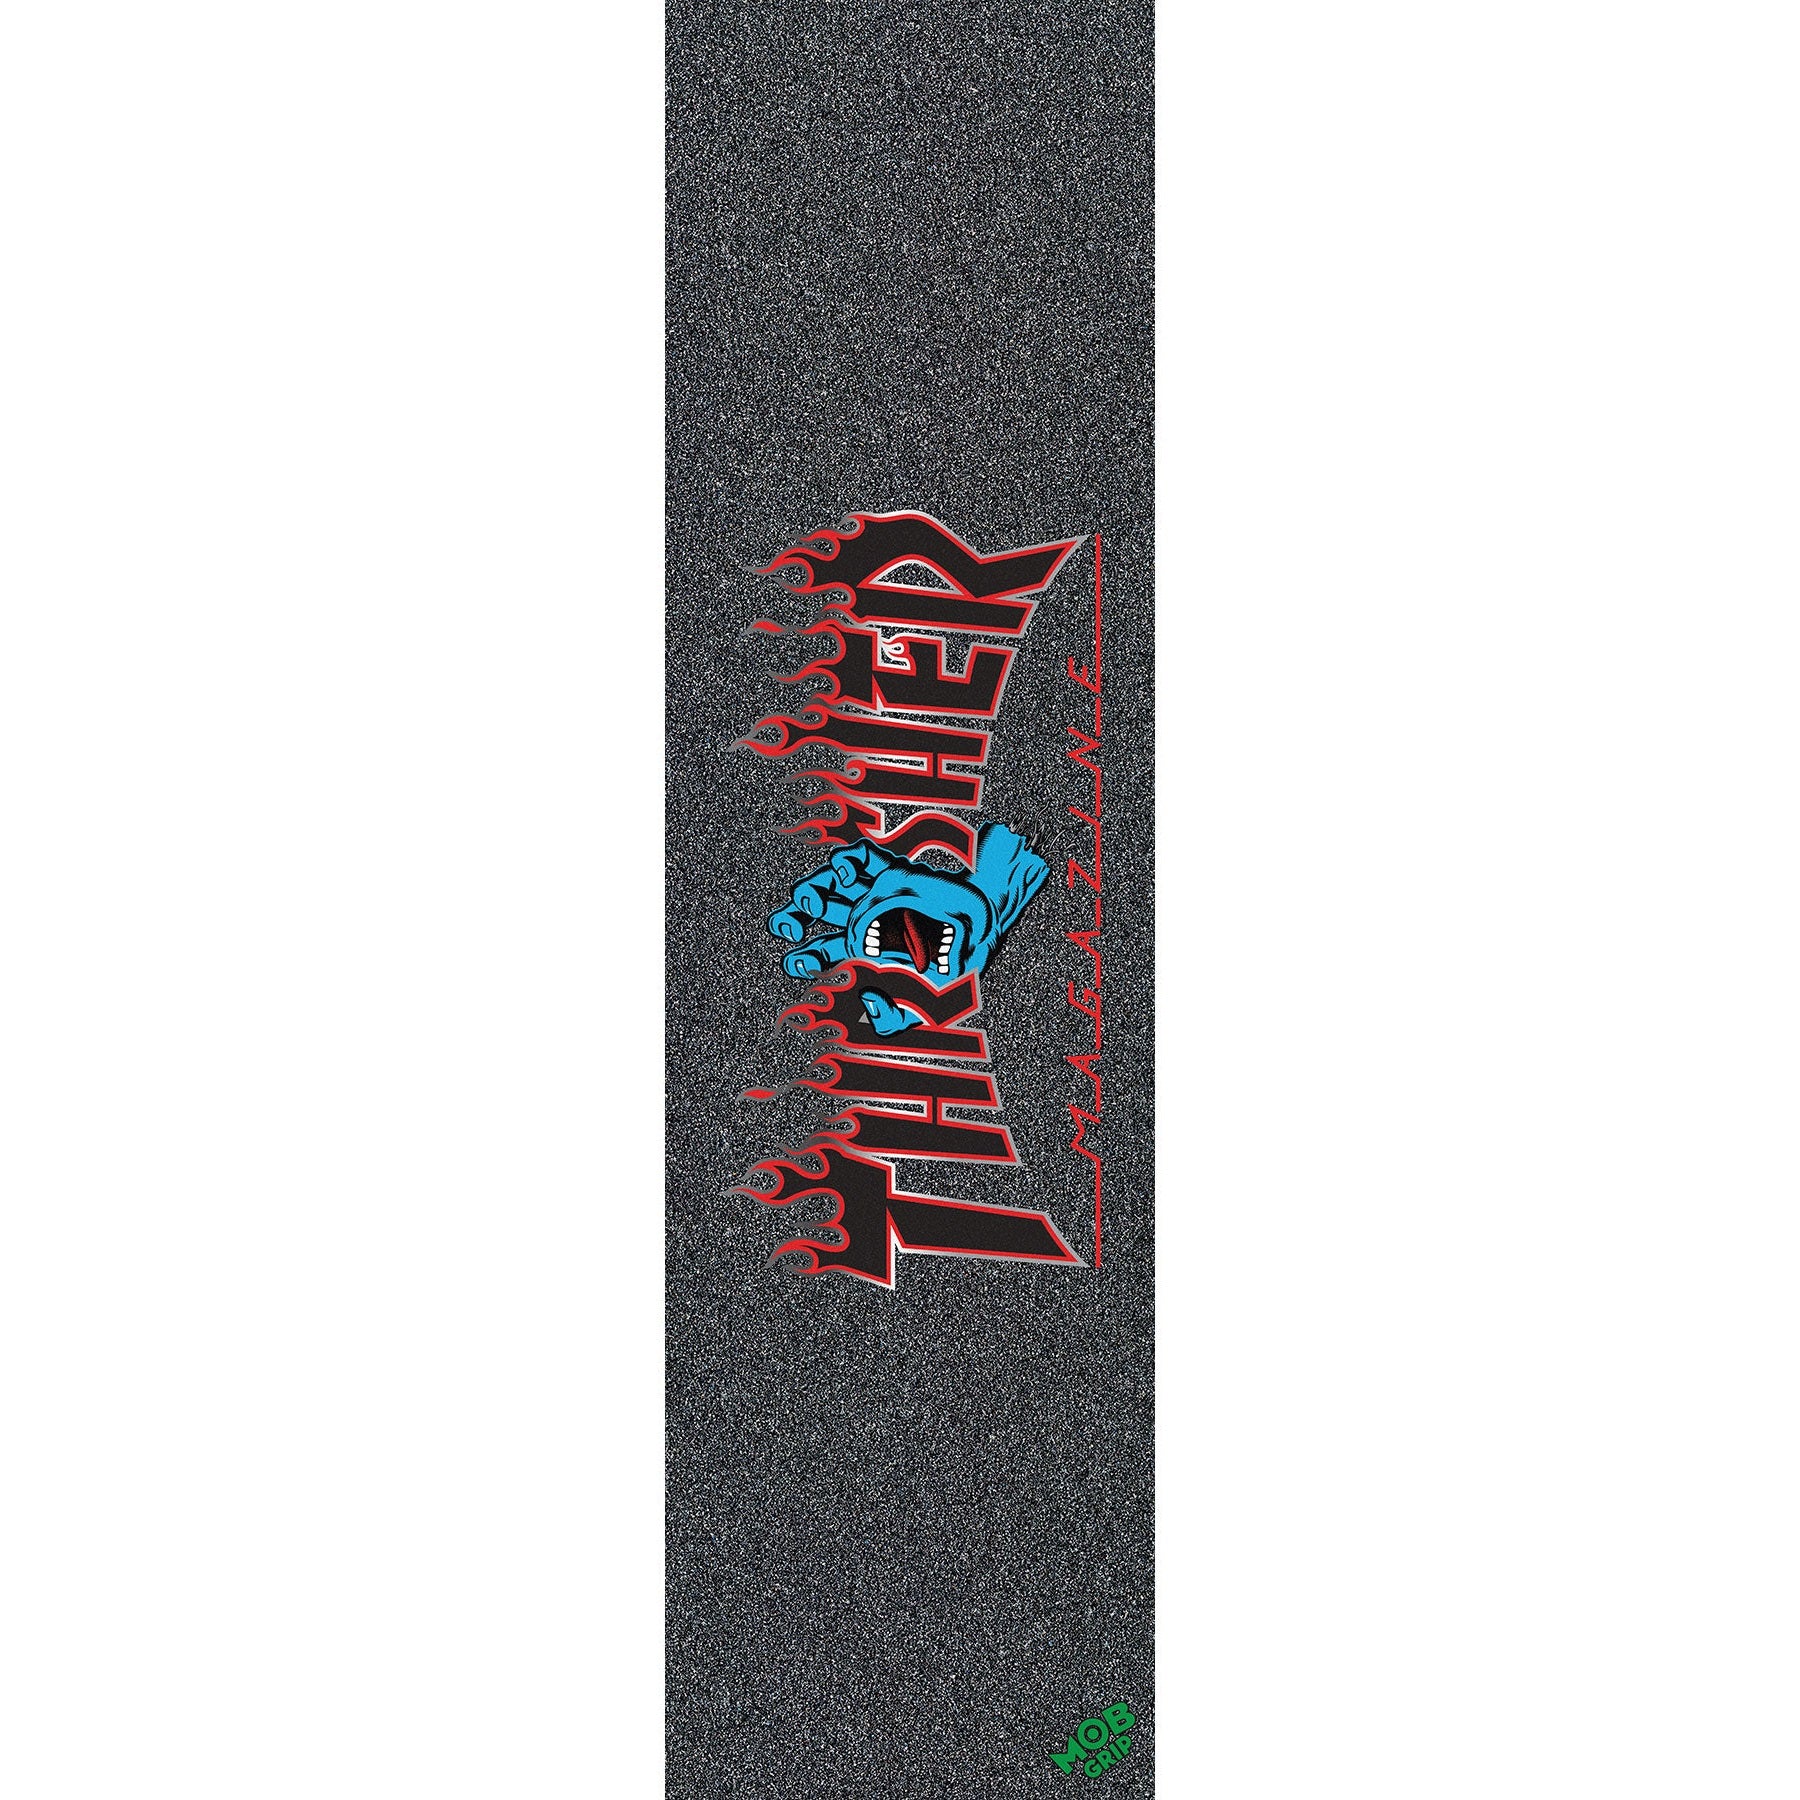 Mob Clear Grip Tape 5 Sheets Skateboard Griptape 10 x 33 Customize Your  Deck